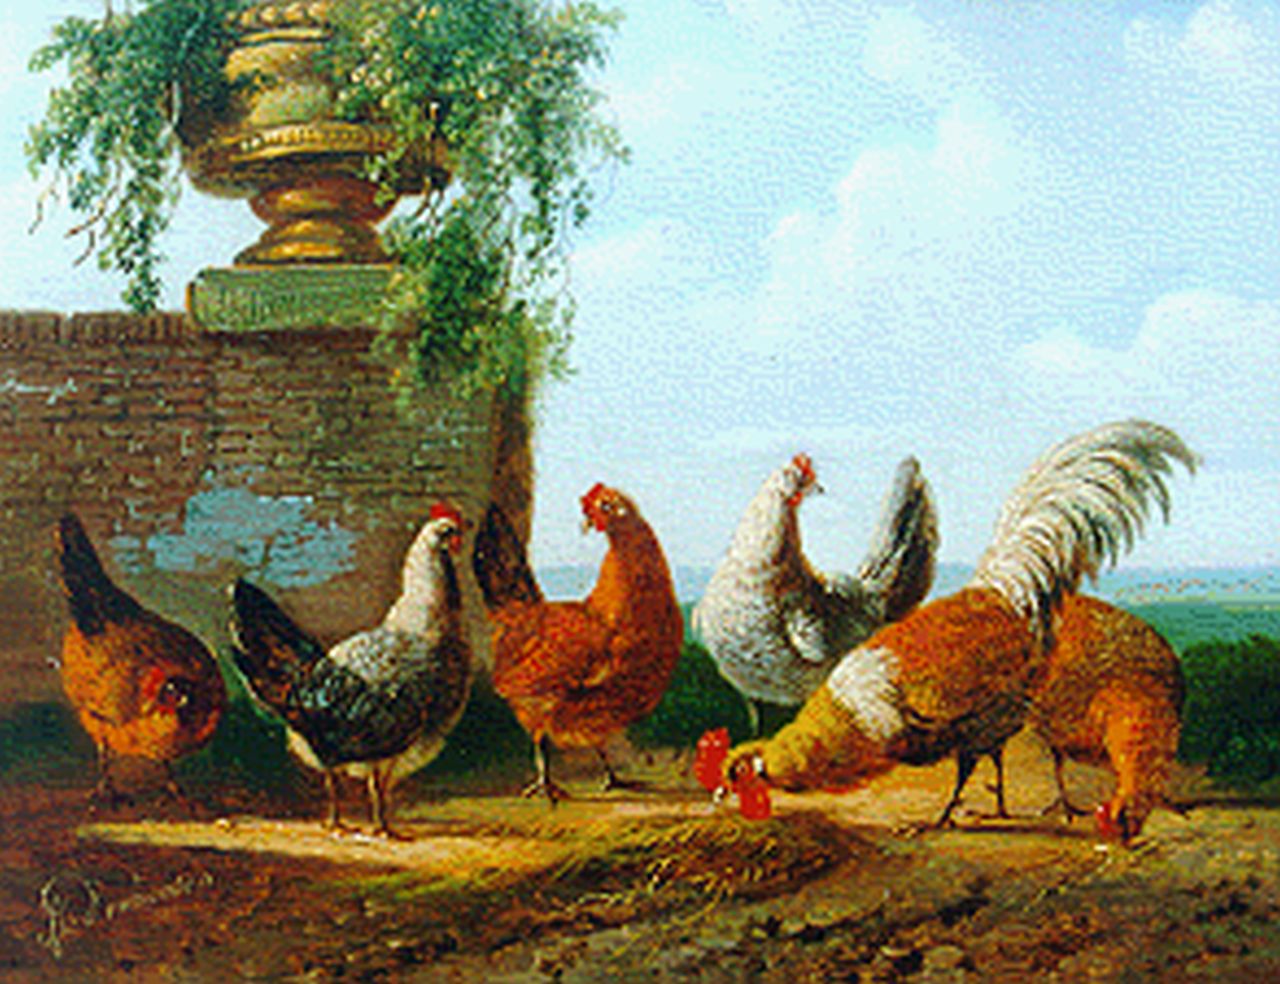 Verhoesen A.  | Albertus Verhoesen, A rooster and five chickens, Öl auf Holz 12,5 x 15,5 cm, signed l.l.